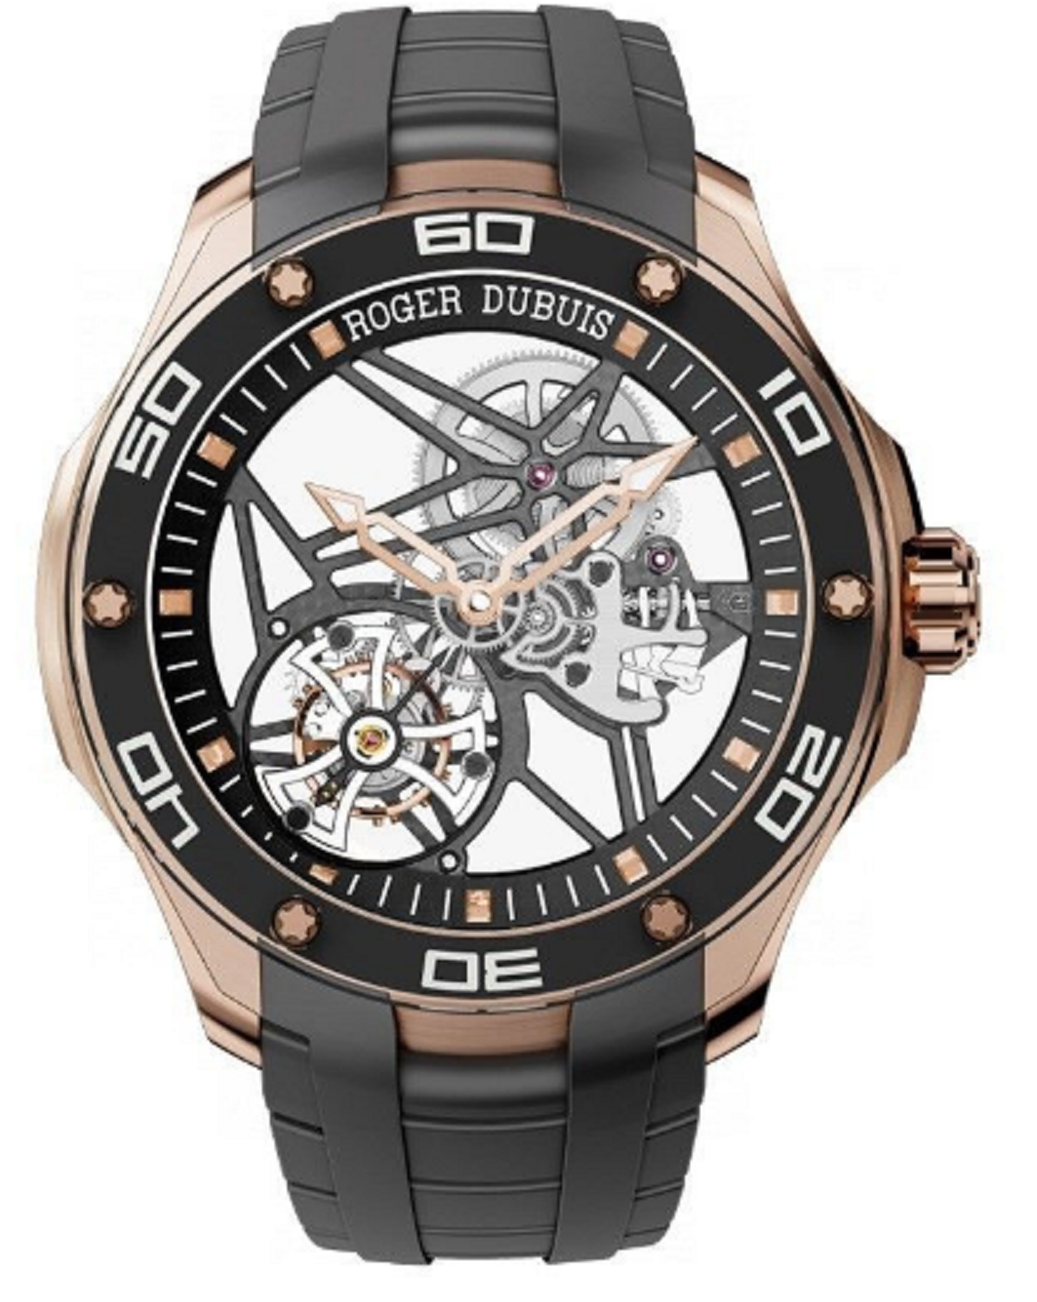 Replica Roger Dubuis Pulsion Skeleton Pulsion Skeleton Flying Tourbillon in Rose Gold - Limited Edition of 188 Pieces RDDBPU0001 RDDBPU0001